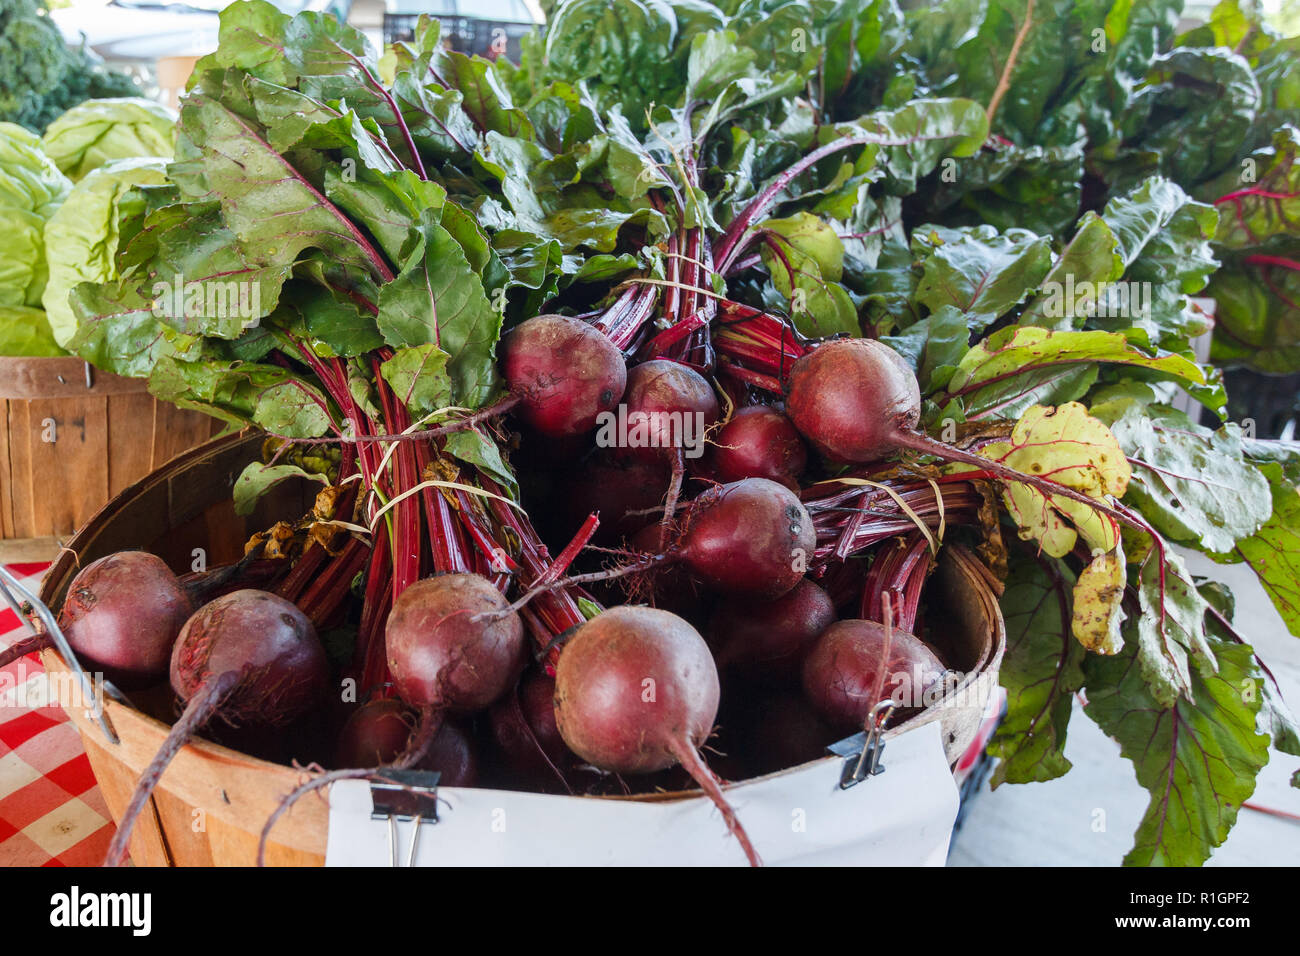 Fresh Beets at a Produce Stand Stock Photo